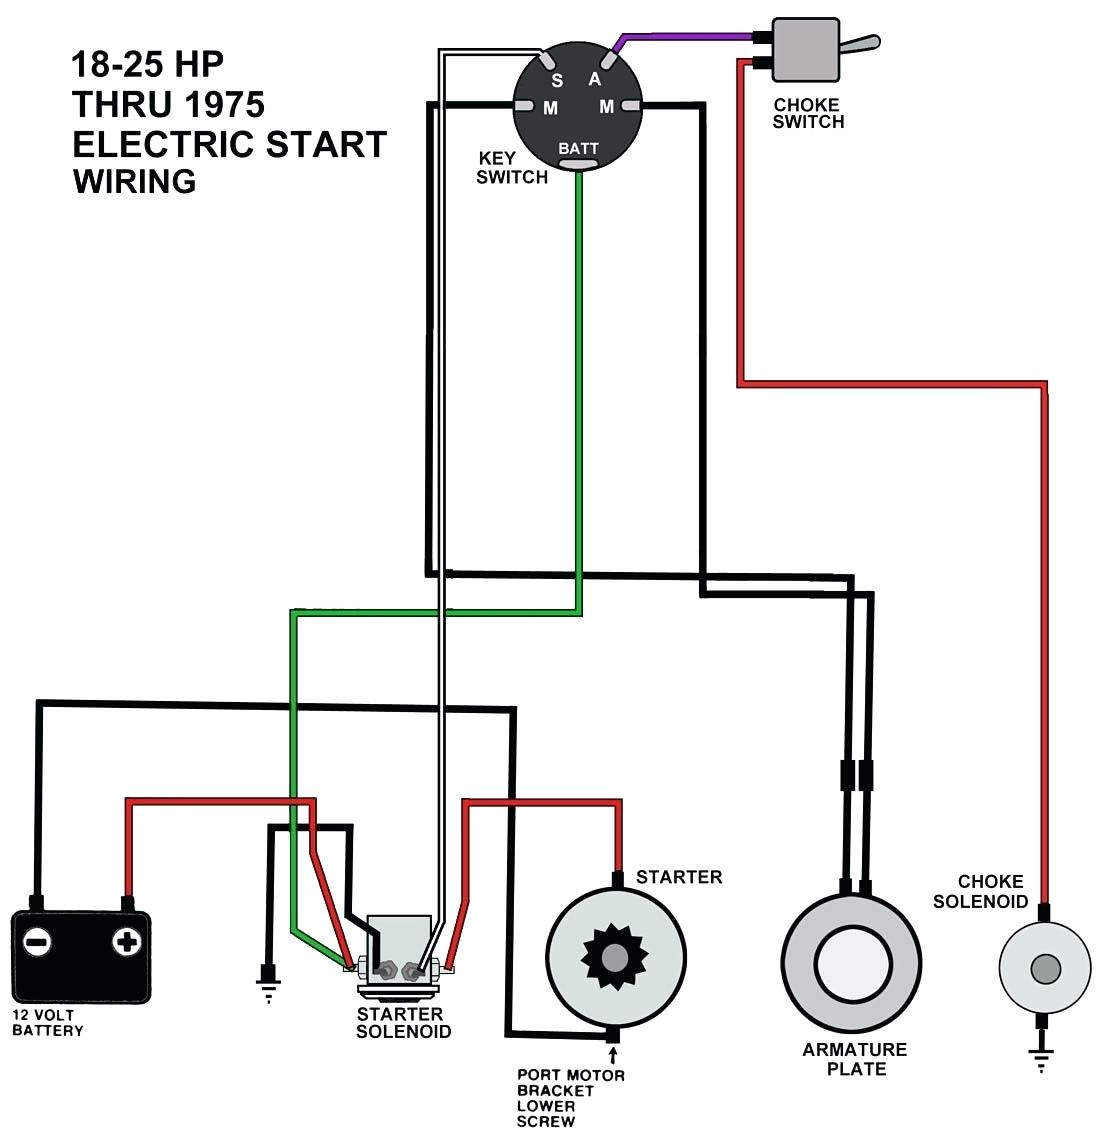 Wiring Diagram For Boat Ignition Switch | Wiring Diagram - Ignition Switch Wiring Diagram